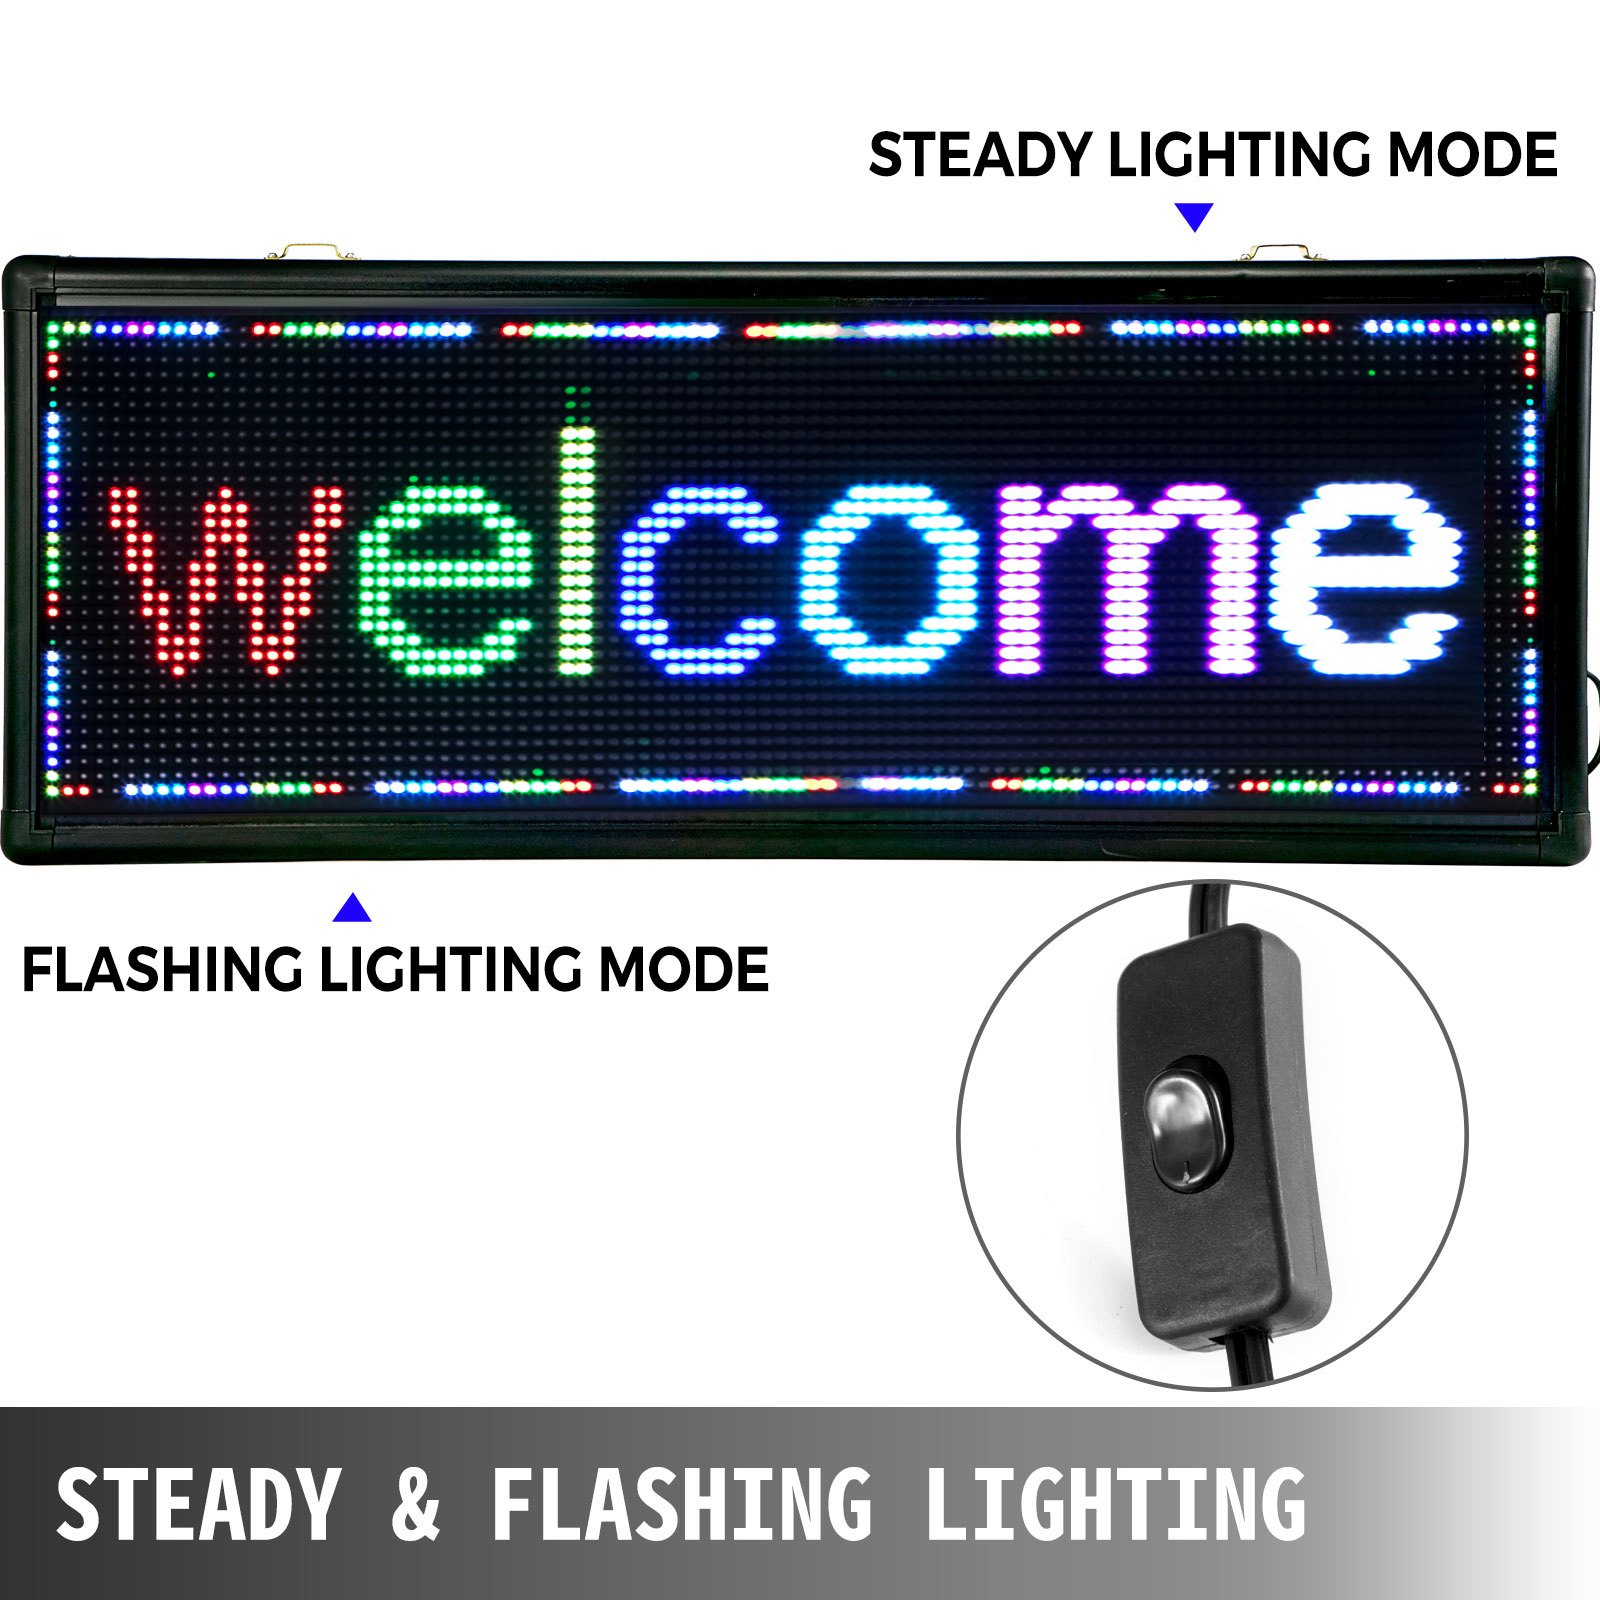 VEVOR Led Sign 40 x inch Led Scrolling Message Display RGB 7-Color P10  Digital Message Display Board Programmable by PC WiFi  USB with SMD  Technology for Advertising and Business